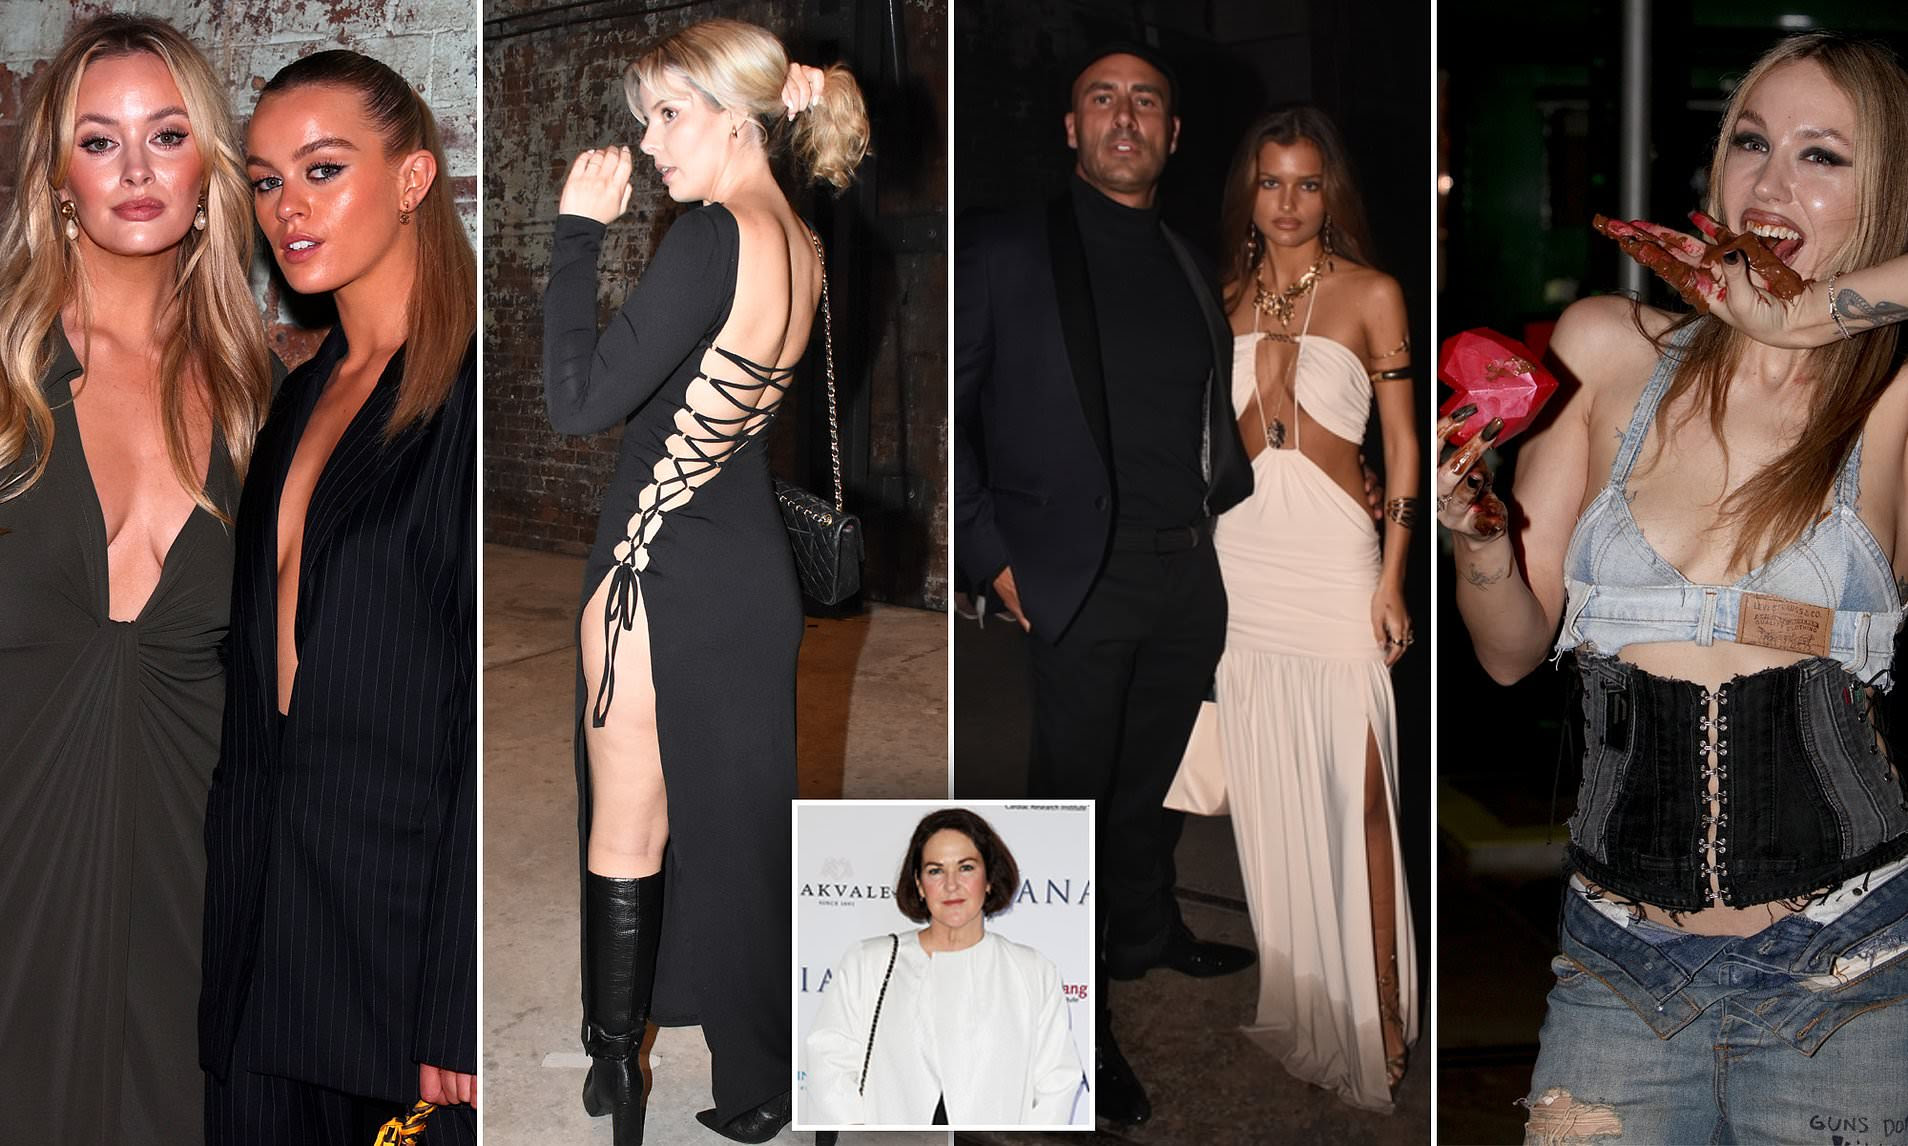 Former Vogue boss defends reality TV stars attending Fashion Week